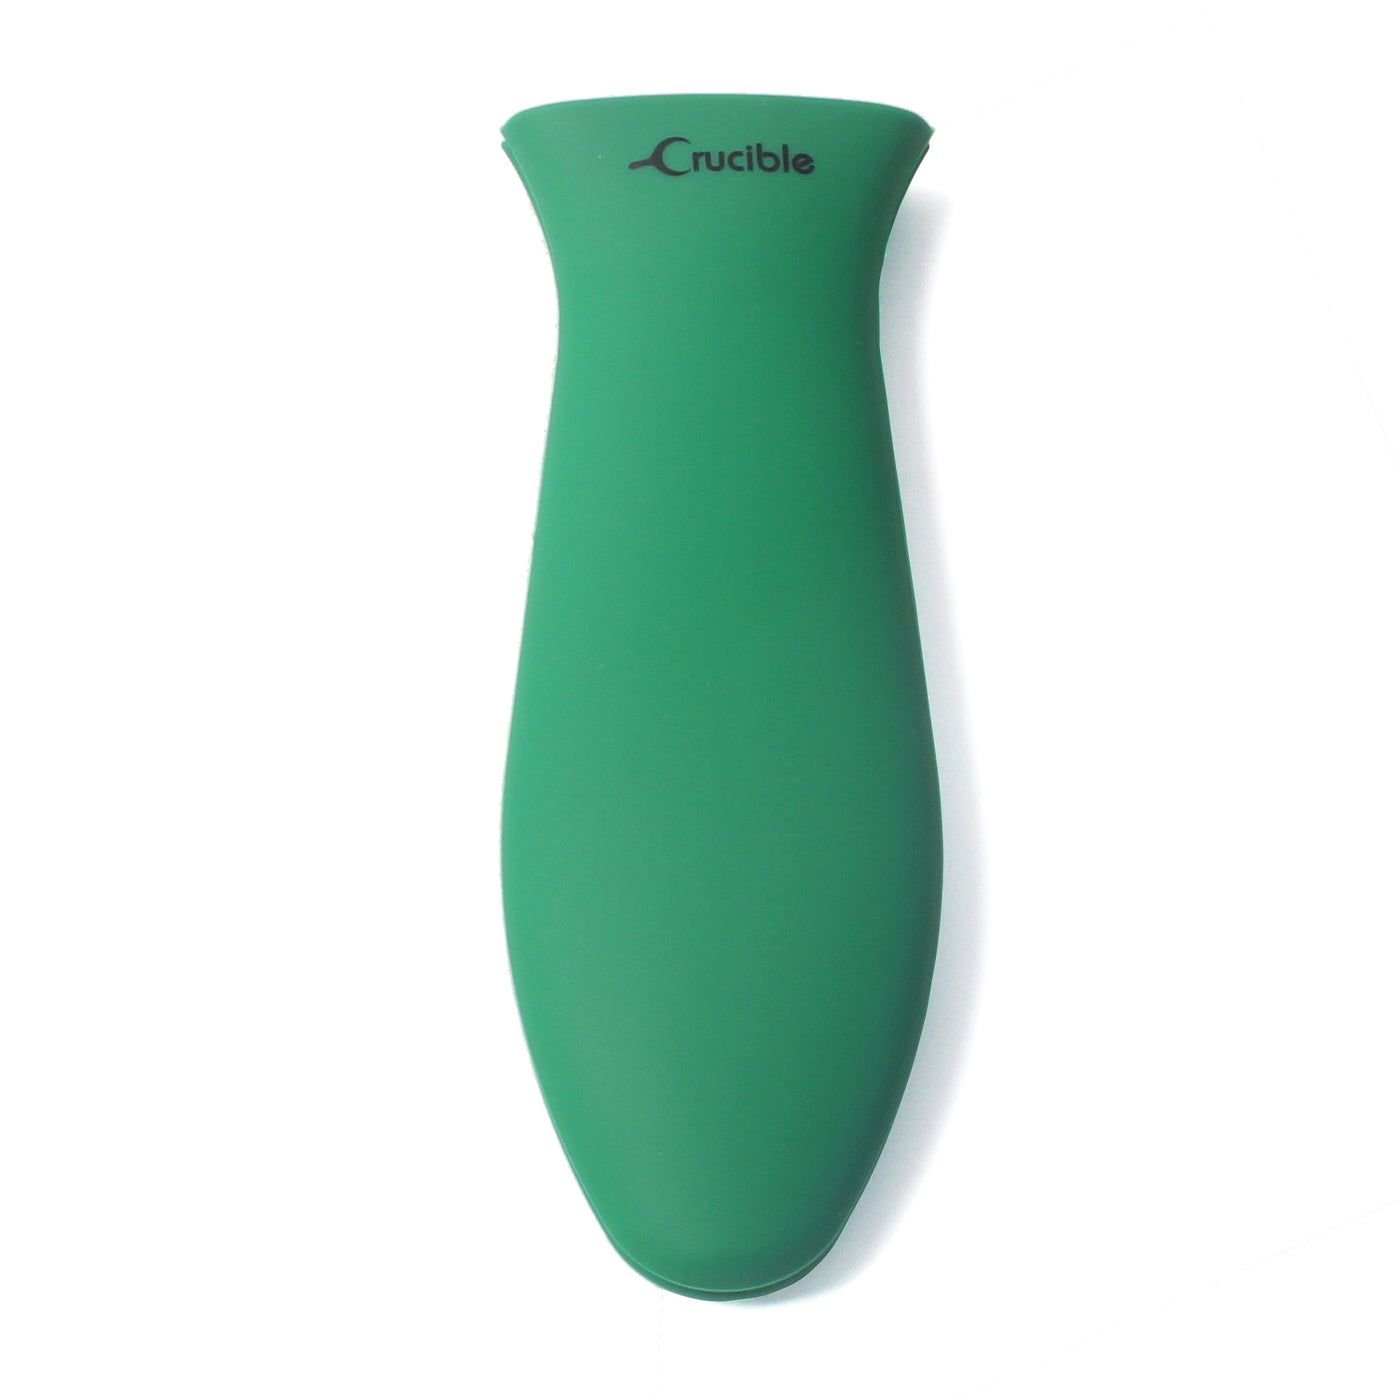 Silicone Hot Handle Holders Green